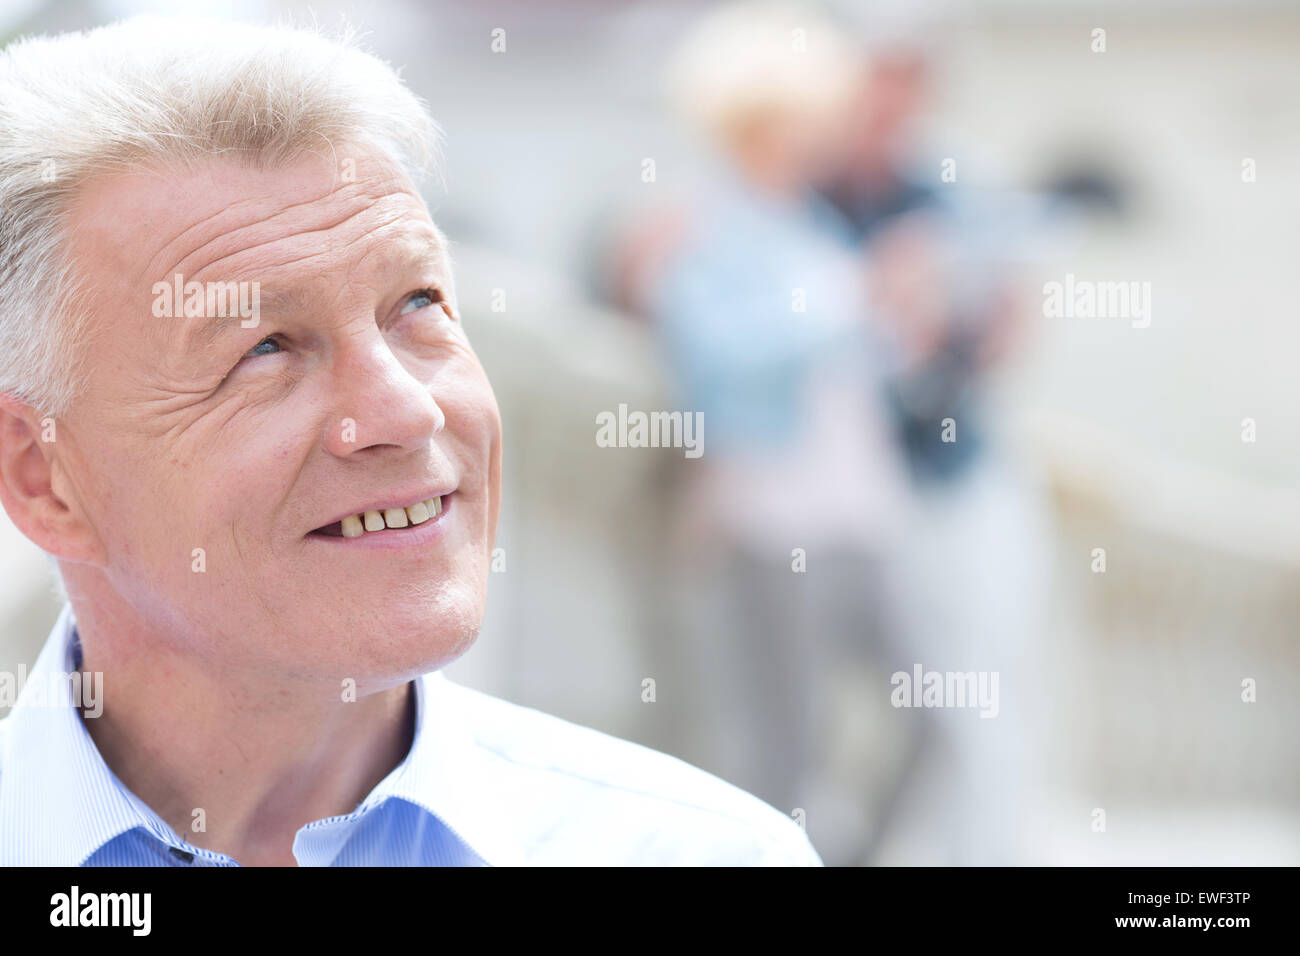 Close-up of smiling man sitting outdoors Banque D'Images